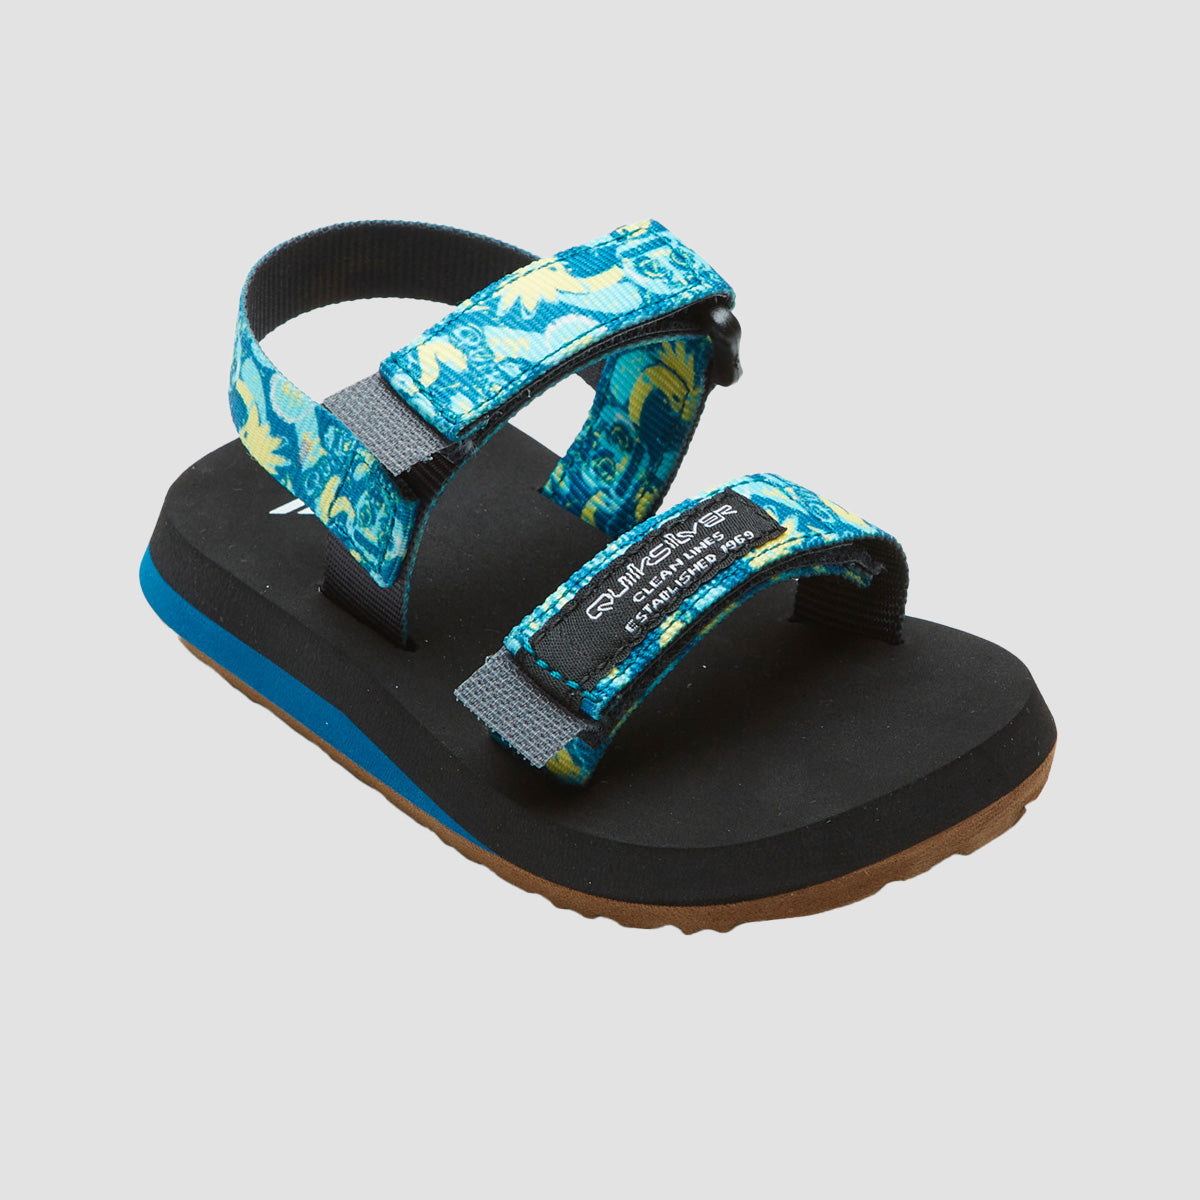 Quiksilver Monkey Caged Toddler Sandals Blue/Blue/Yellow - Kids